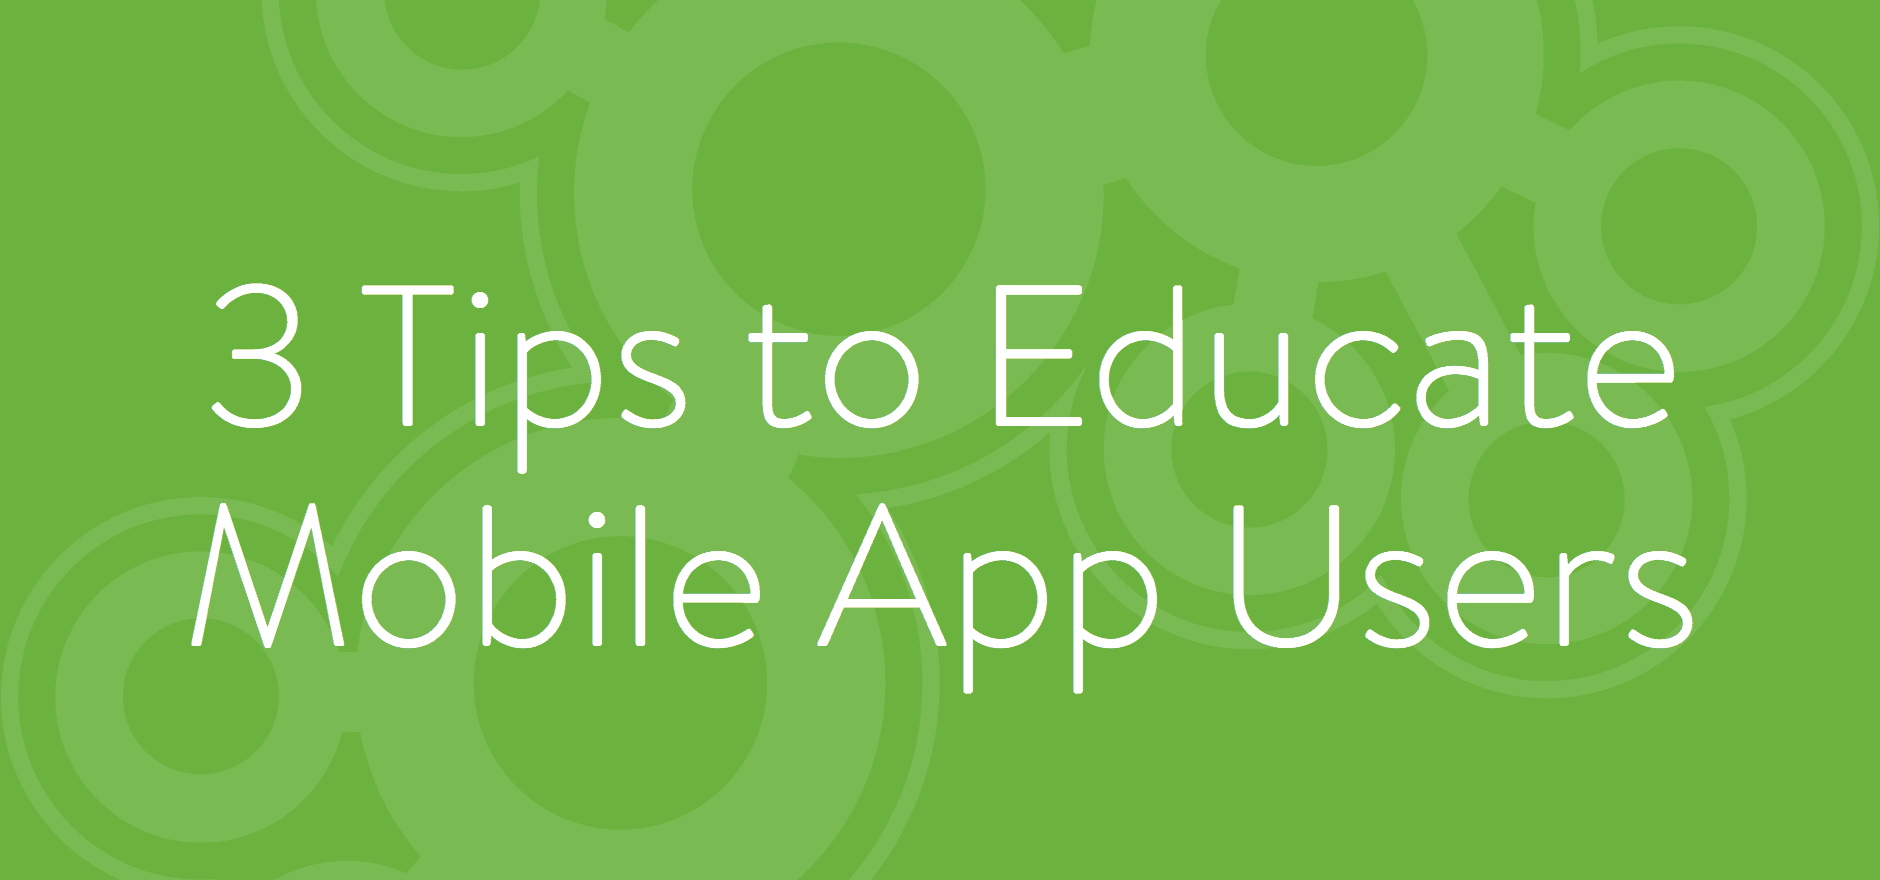 3 Tips to Educate Mobile App Users